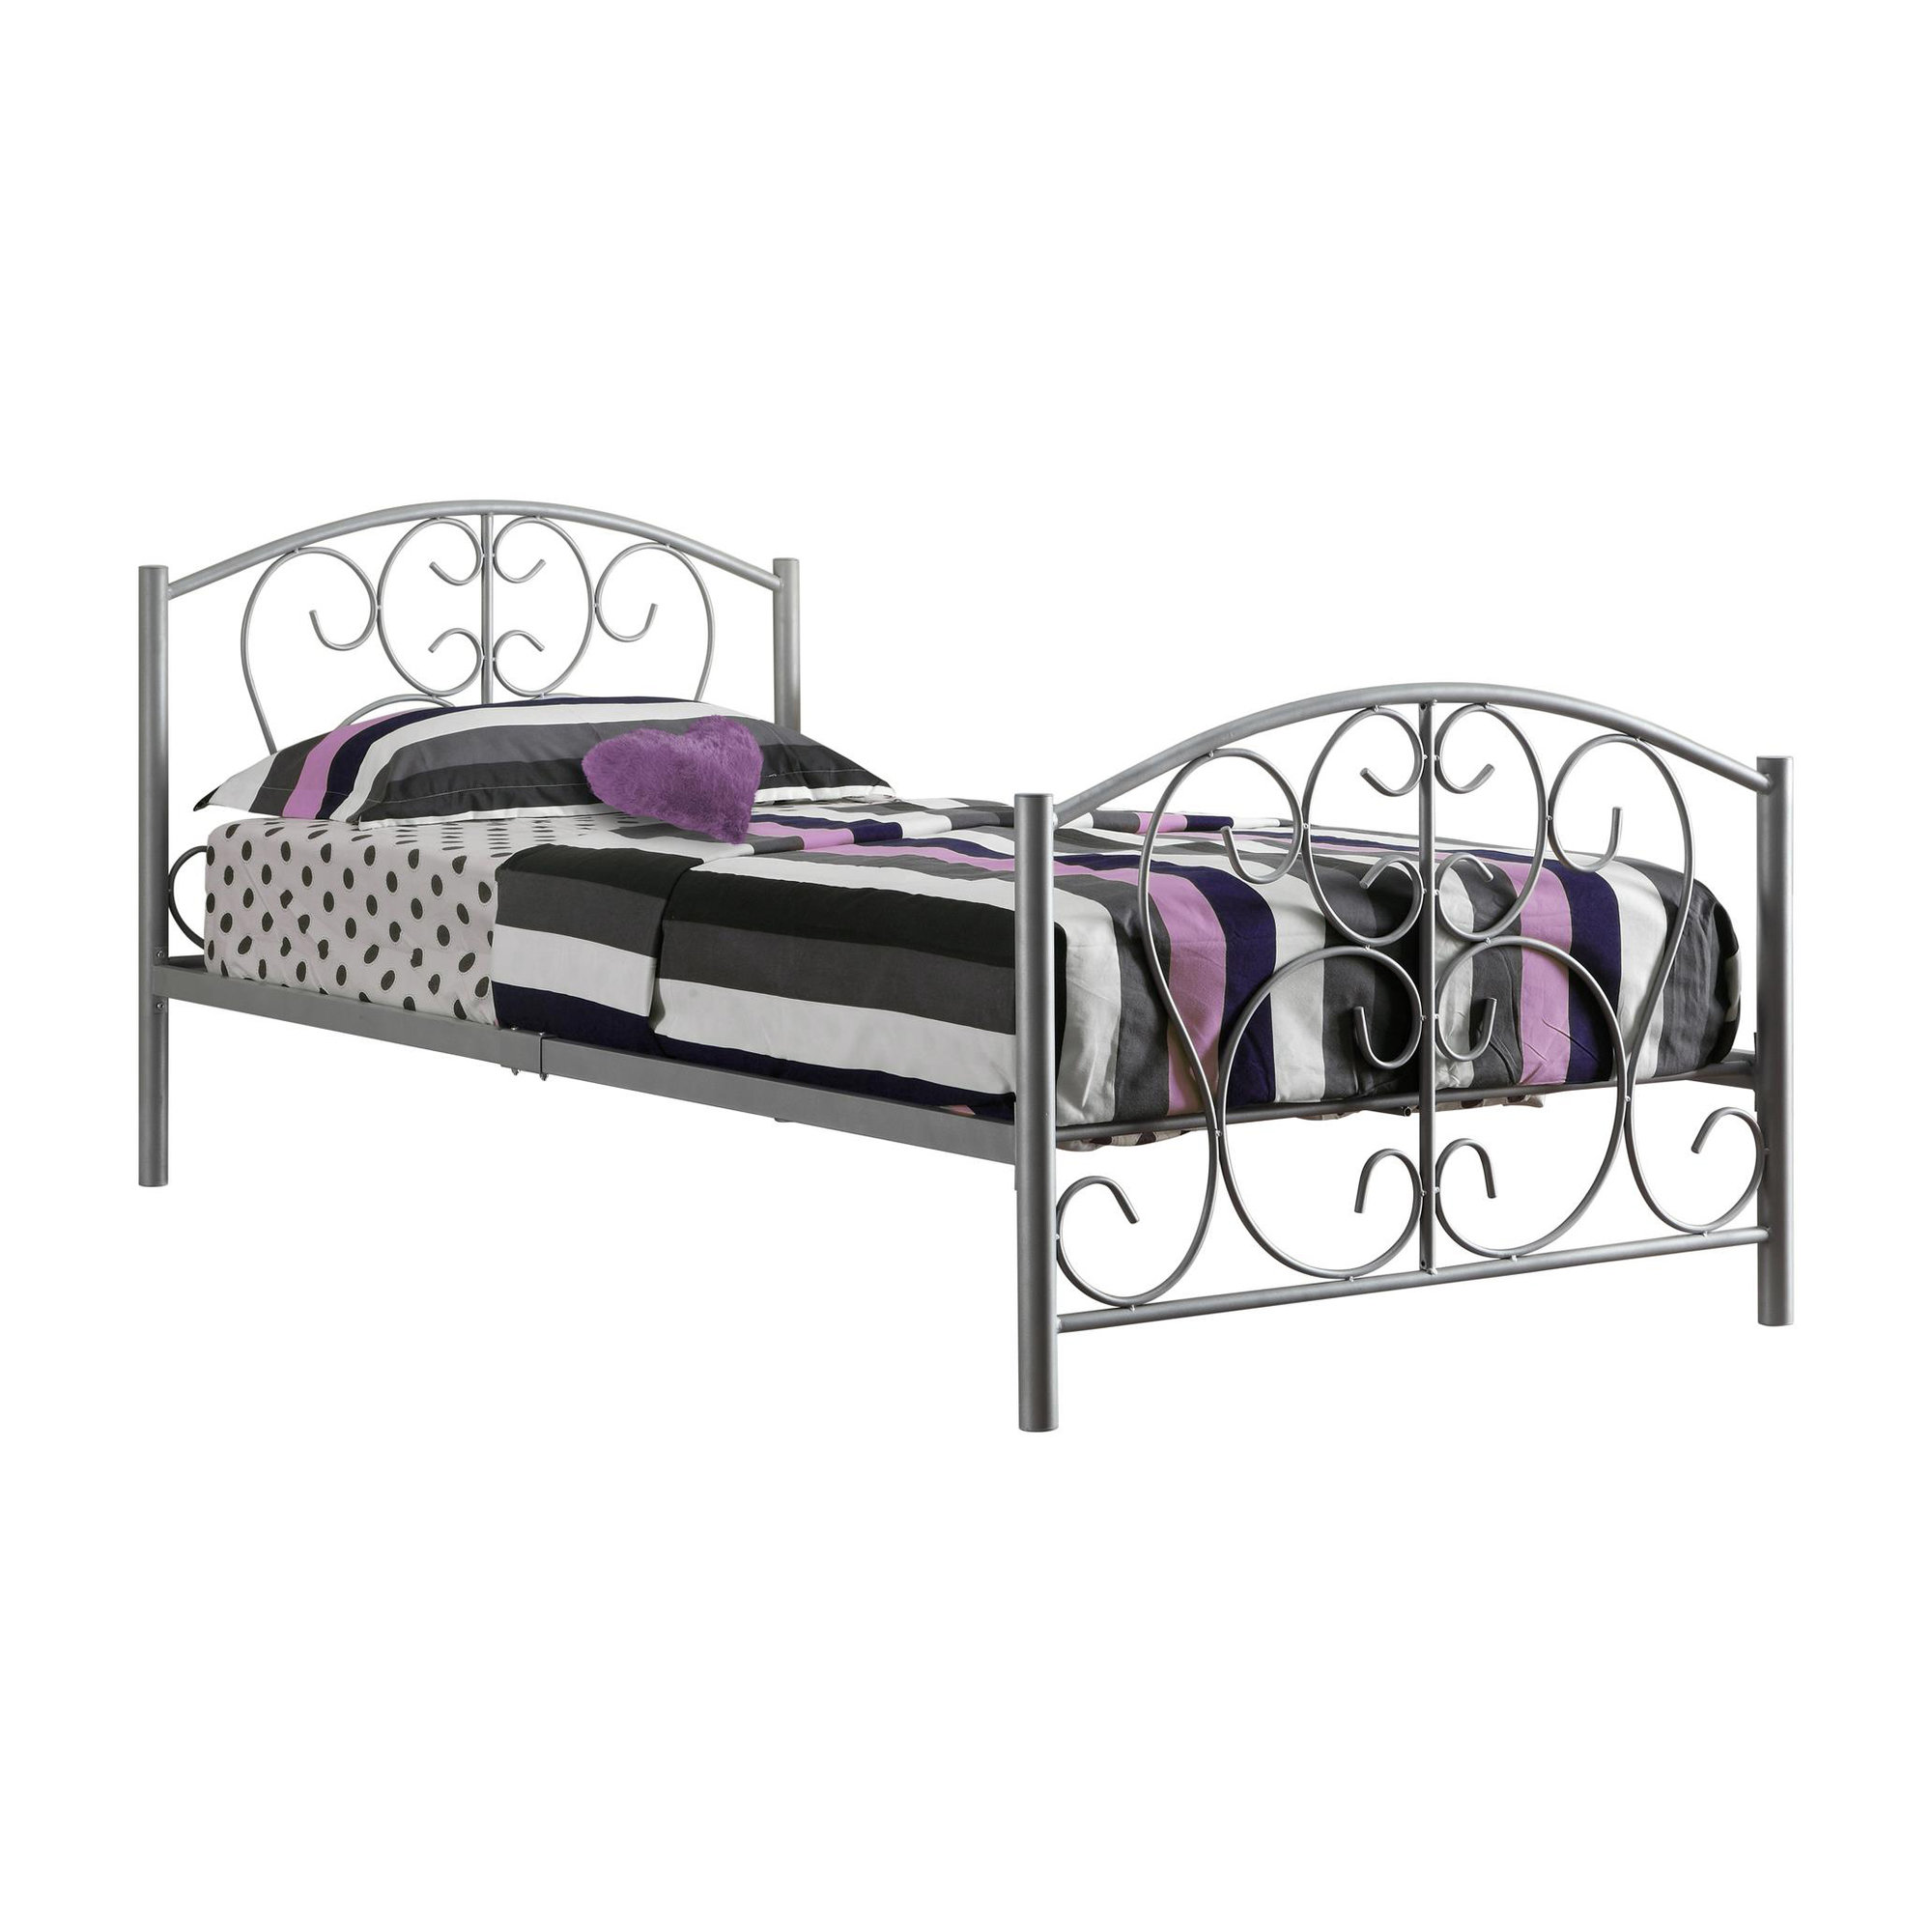 78" x 41" x 37" Silver Metal Twin Size Bed